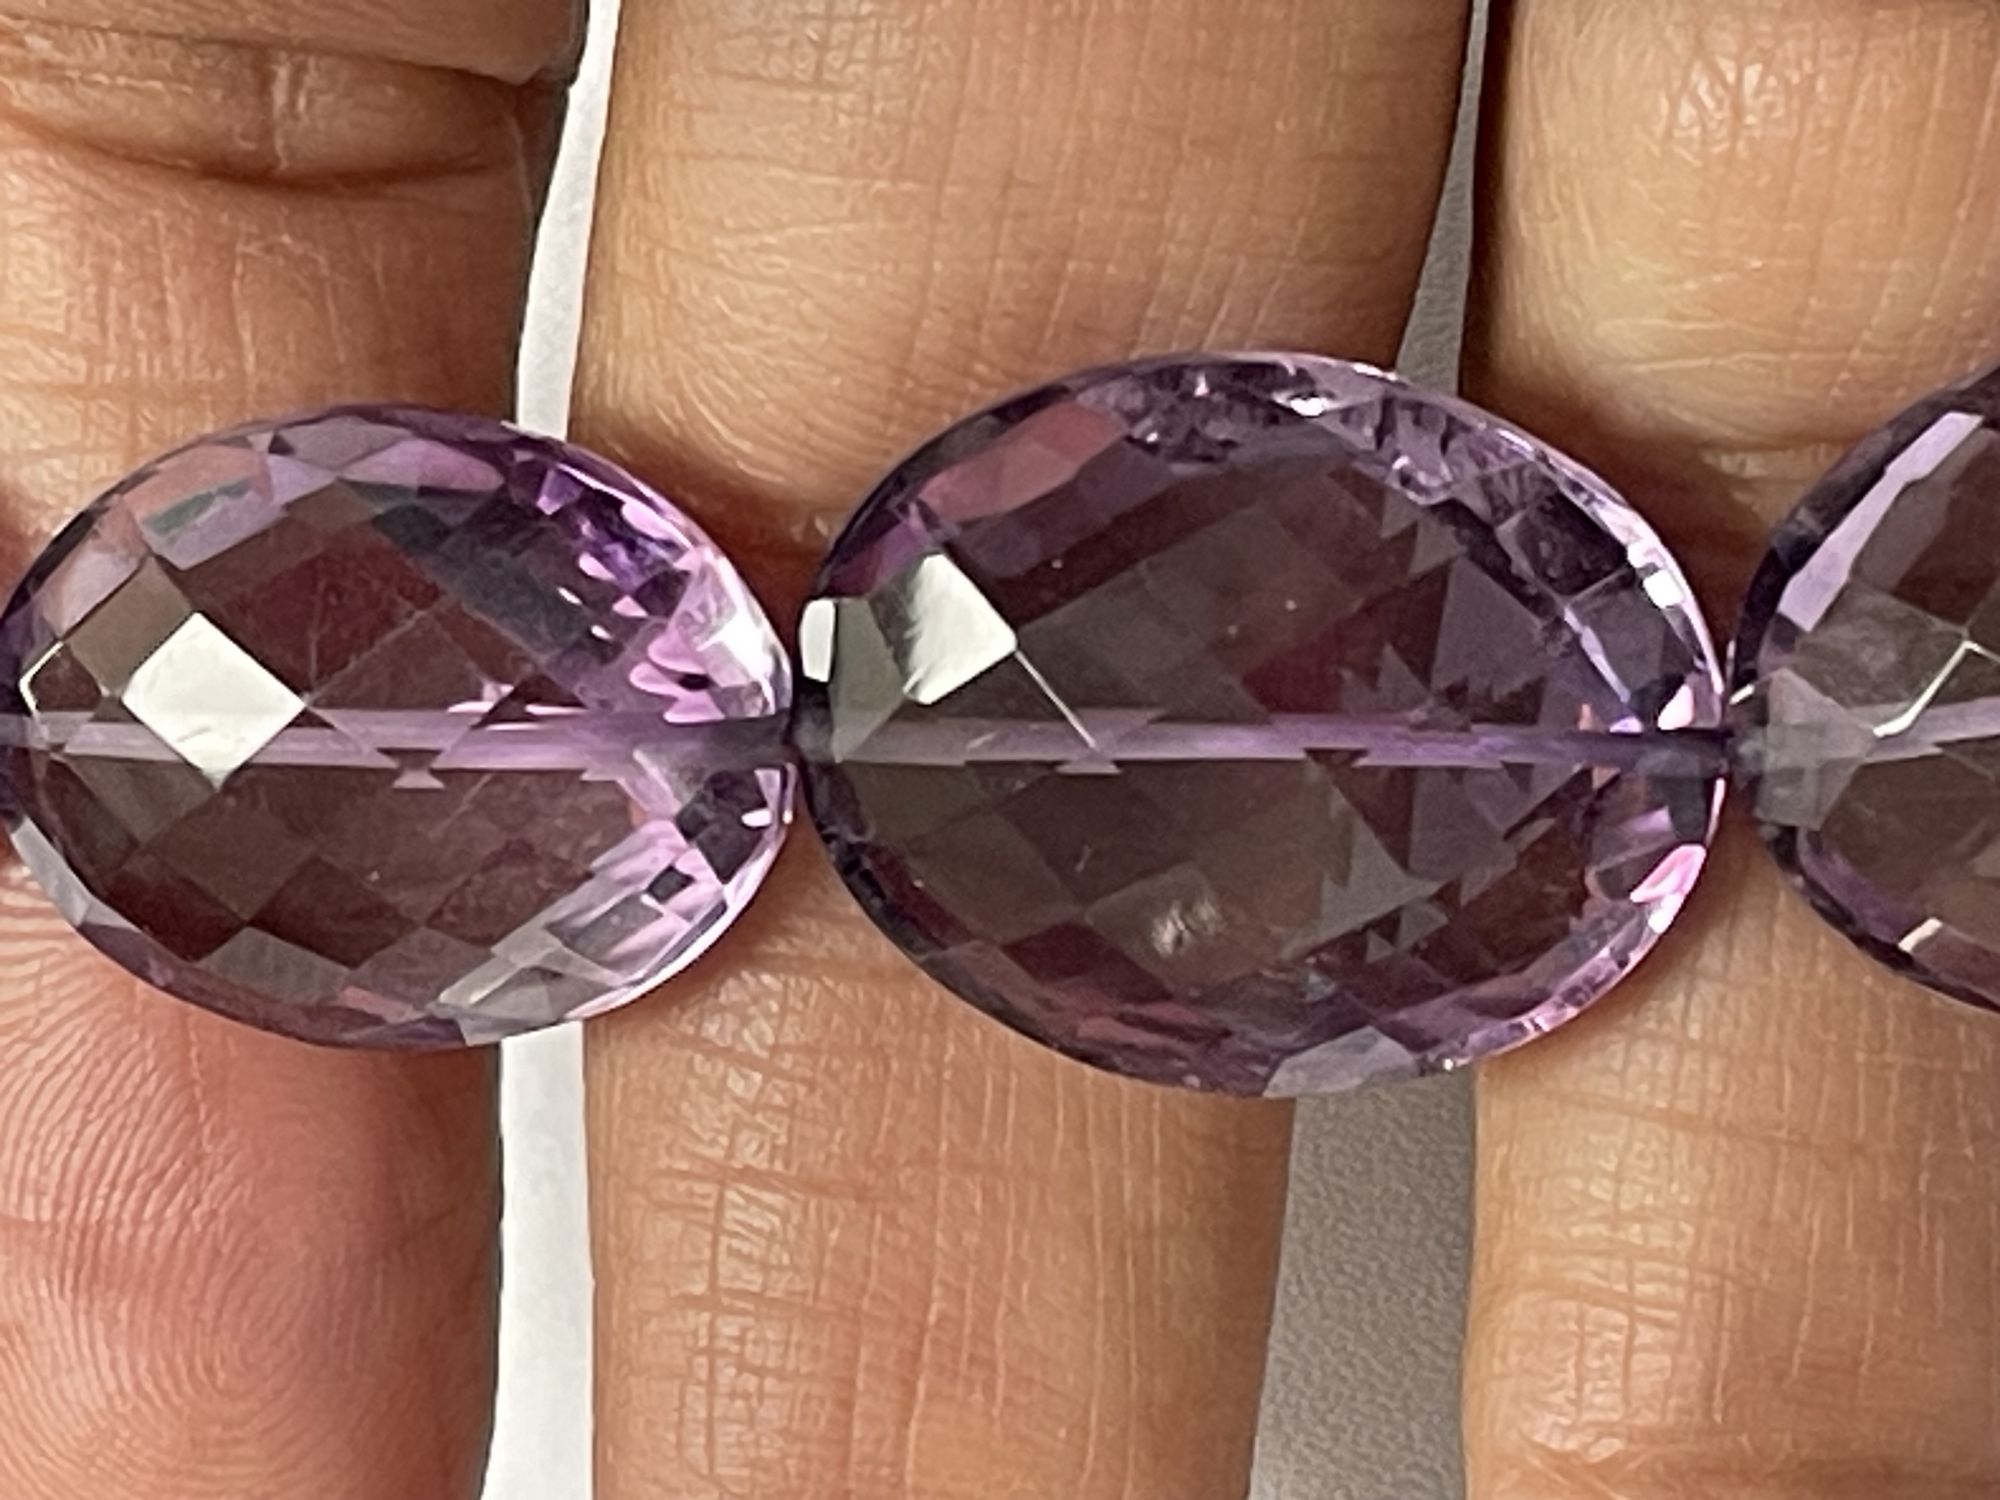 Purple Amethyst Oval Faceted